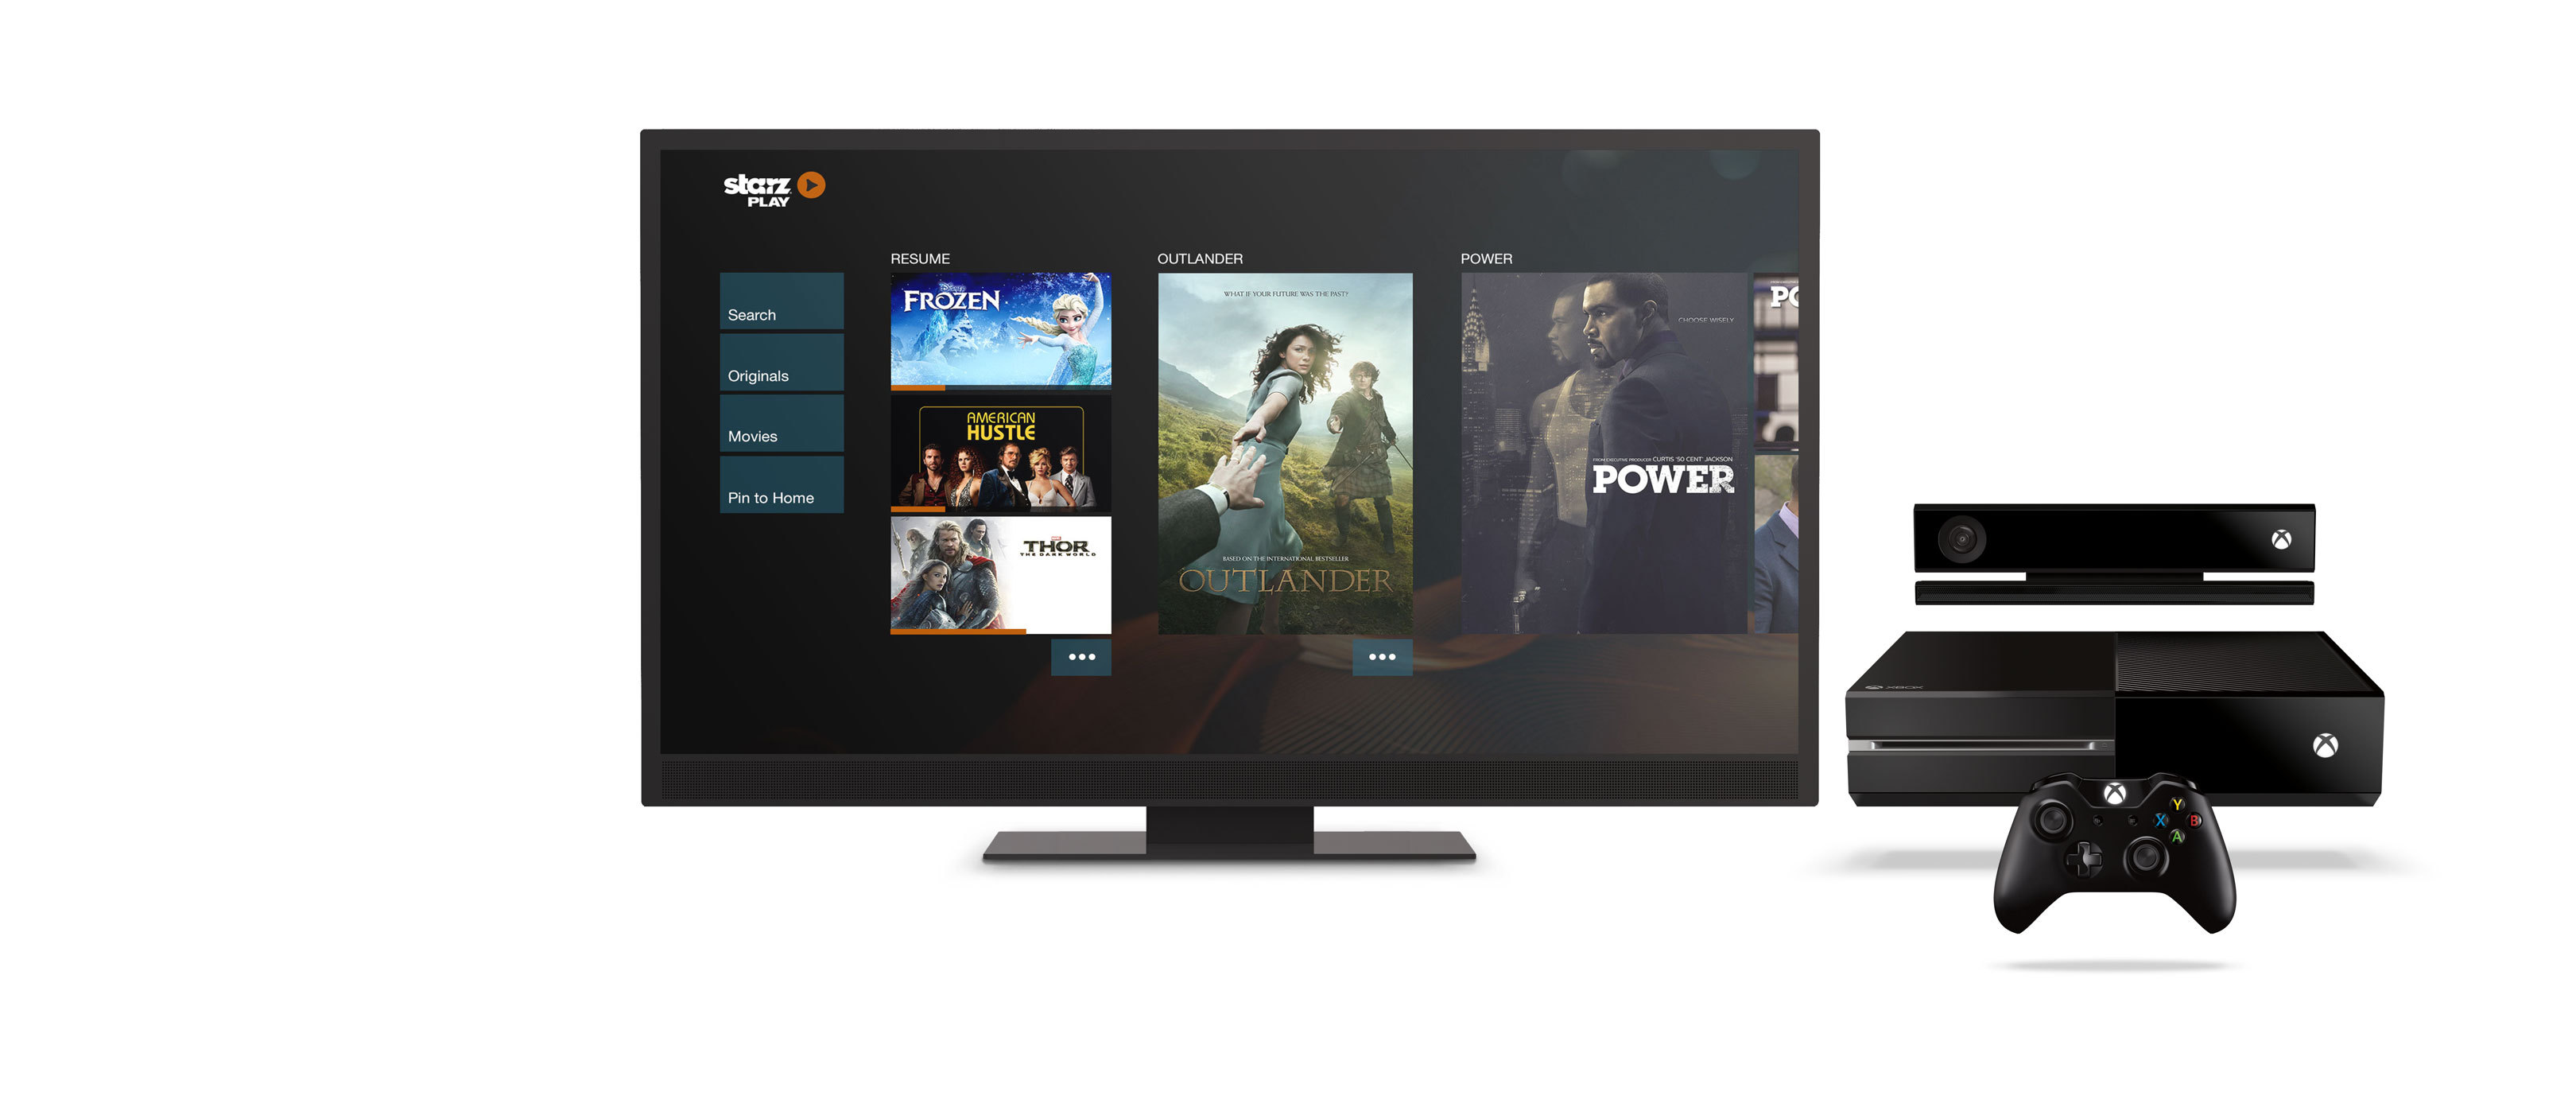 How To Download Movies To Xbox One